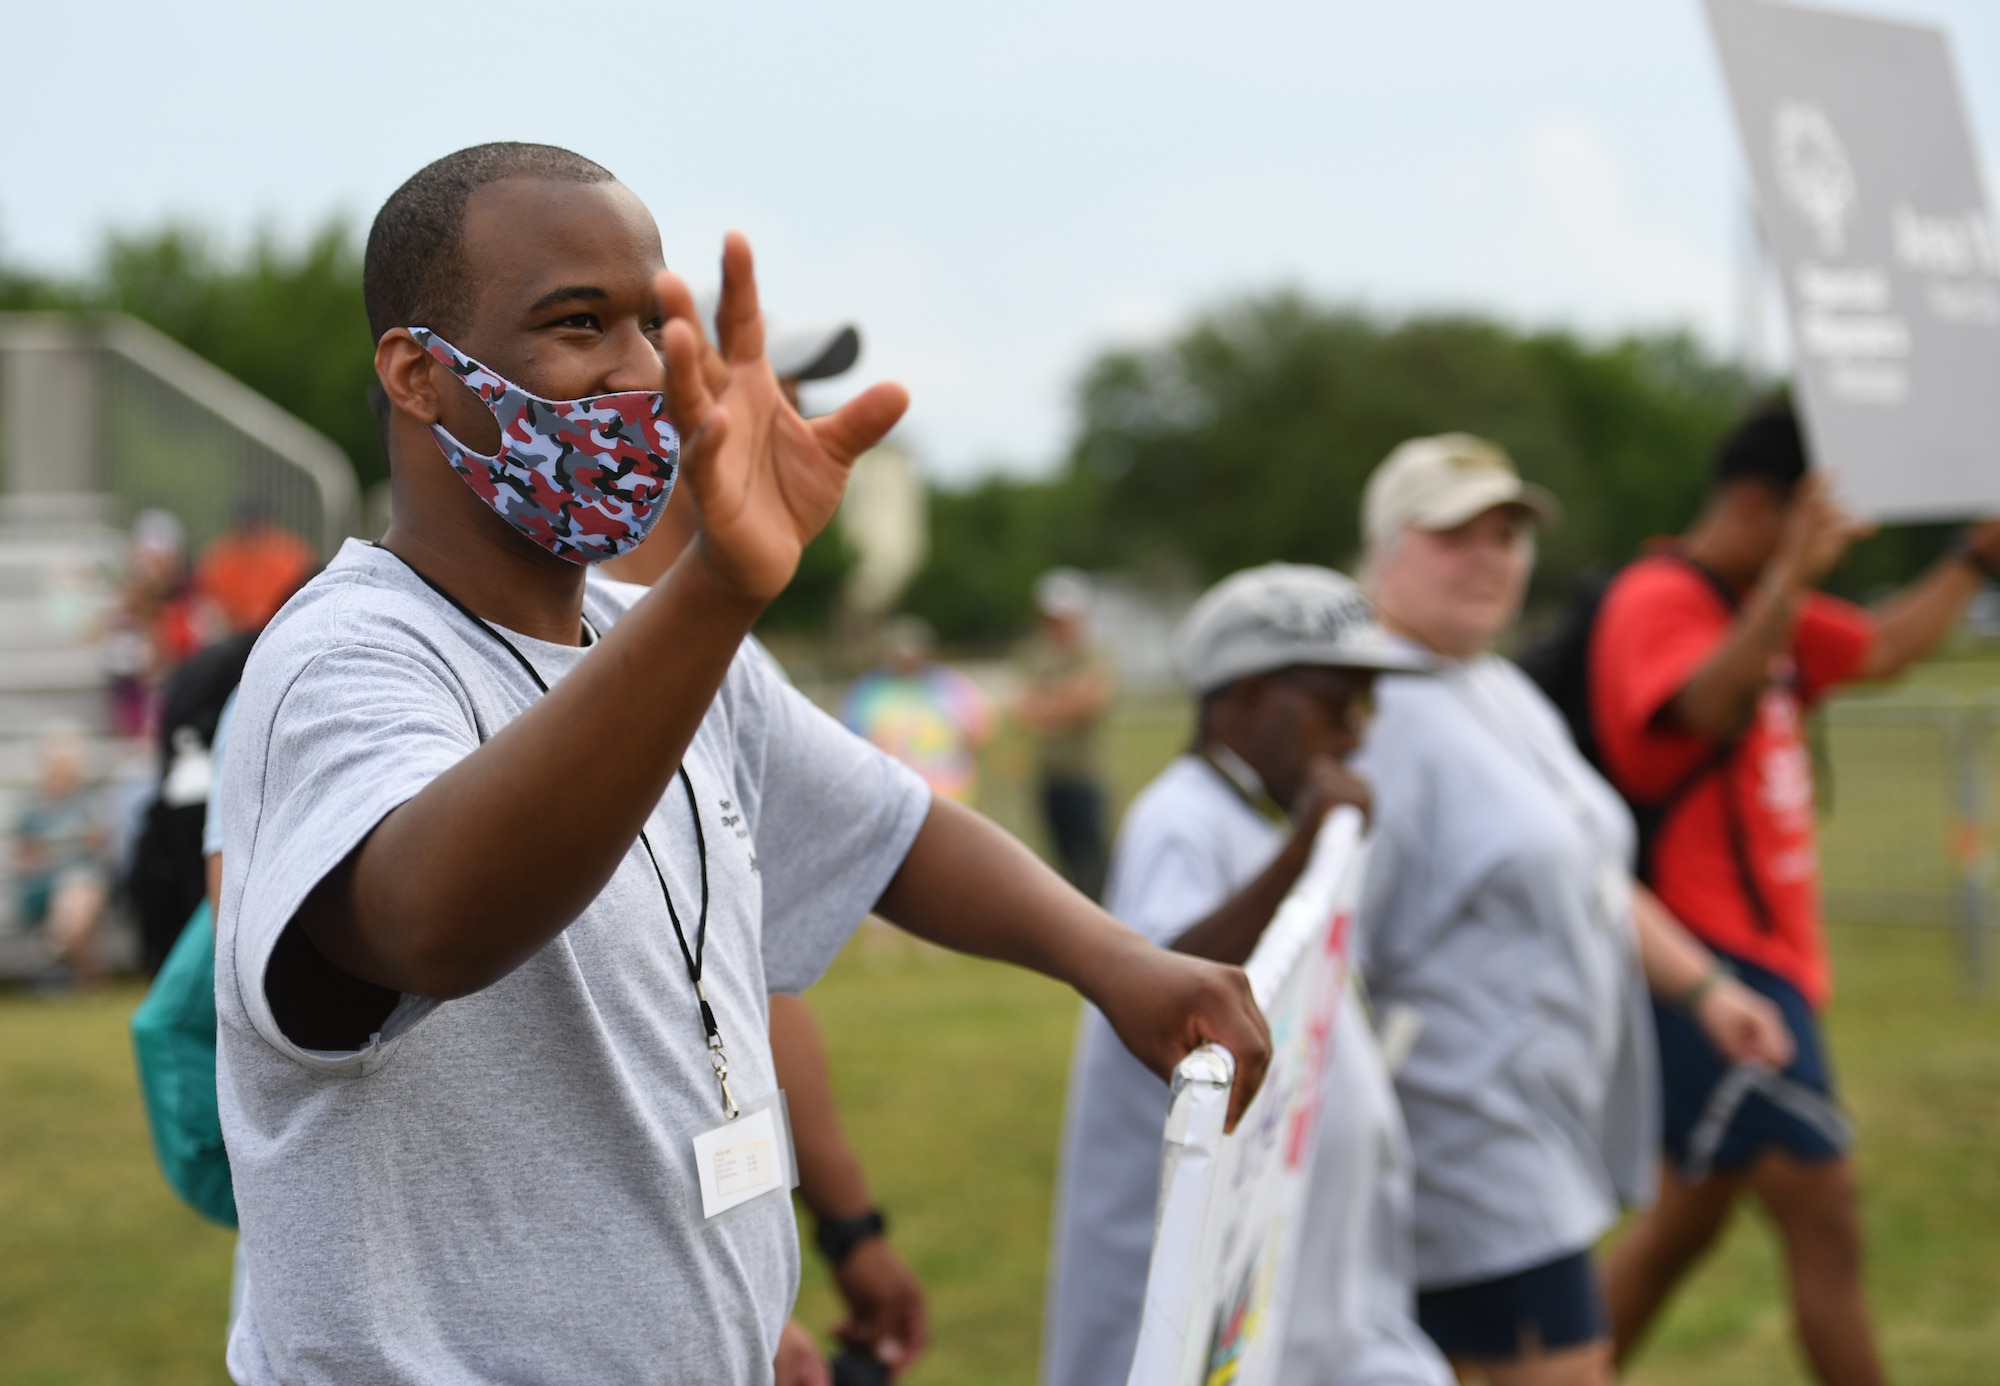 John Walker, Area 10 athlete, attends the Special Olympics Mississippi Summer Games opening ceremonies at Keesler Air Force Base, Mississippi, May 13, 2022. Over 600 athletes participated in the Summer Games. (U.S. Air Force photo by Kemberly Groue)